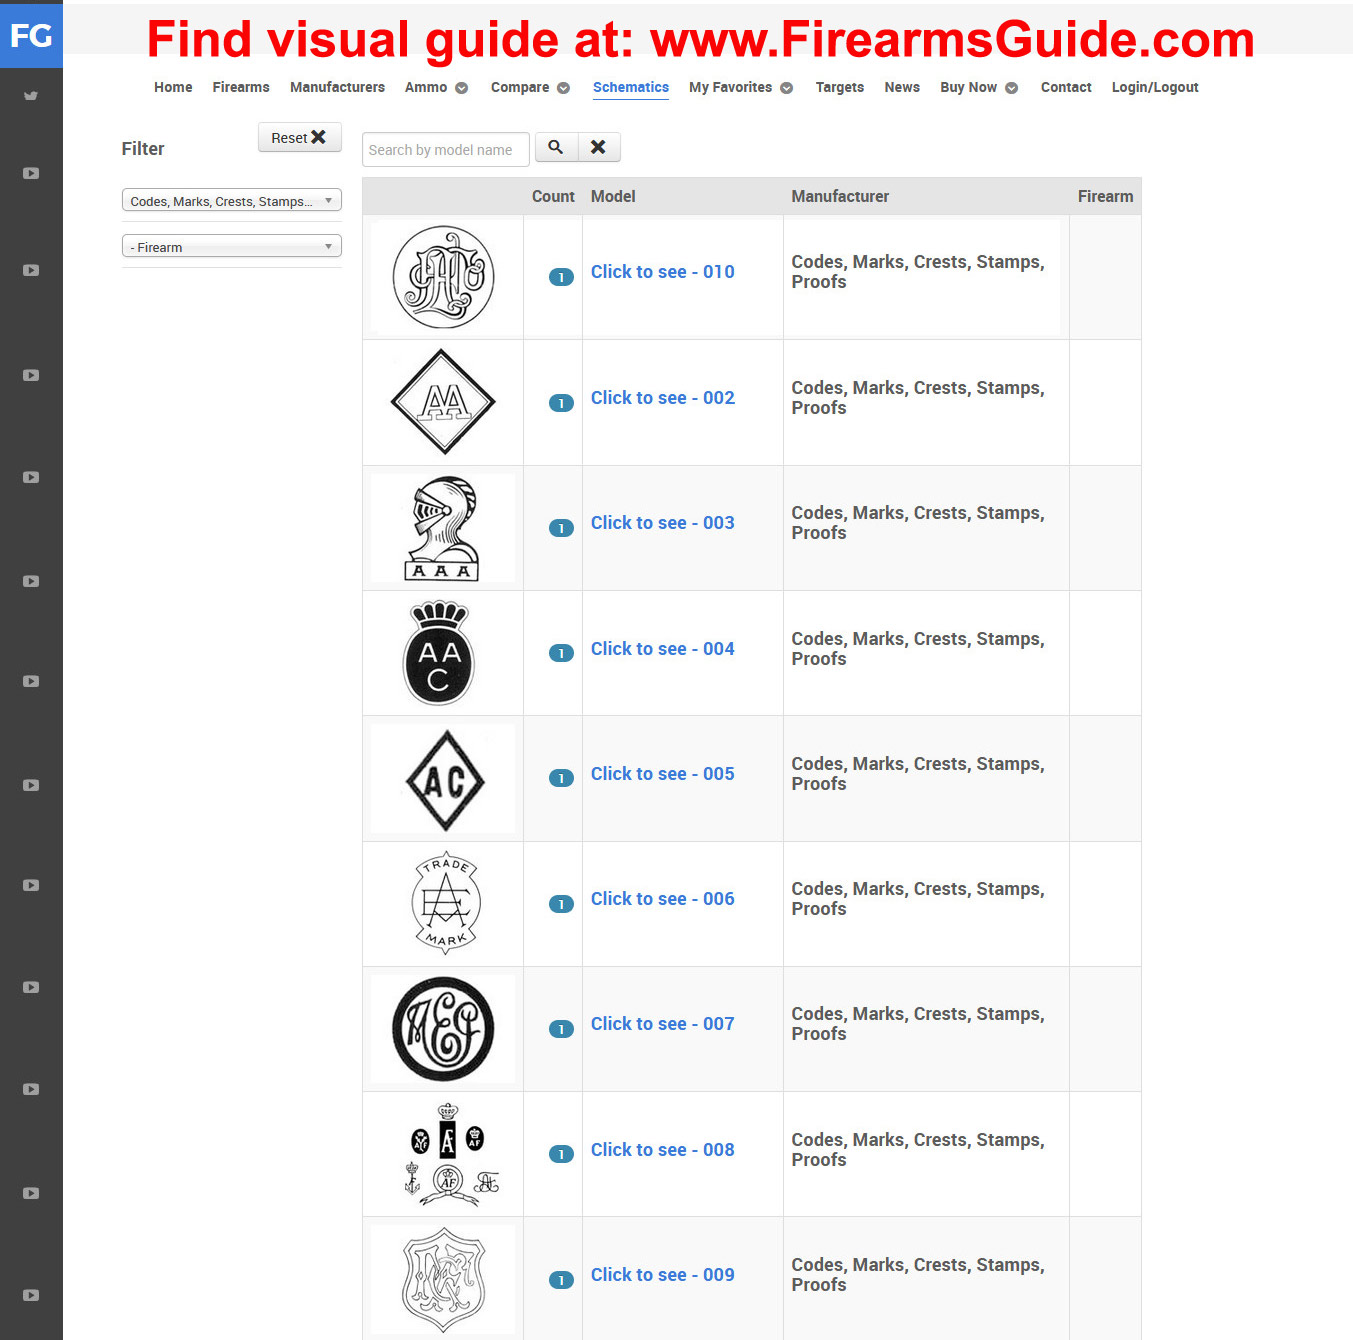 Firearms - Guides - Importation & Verification of Firearms